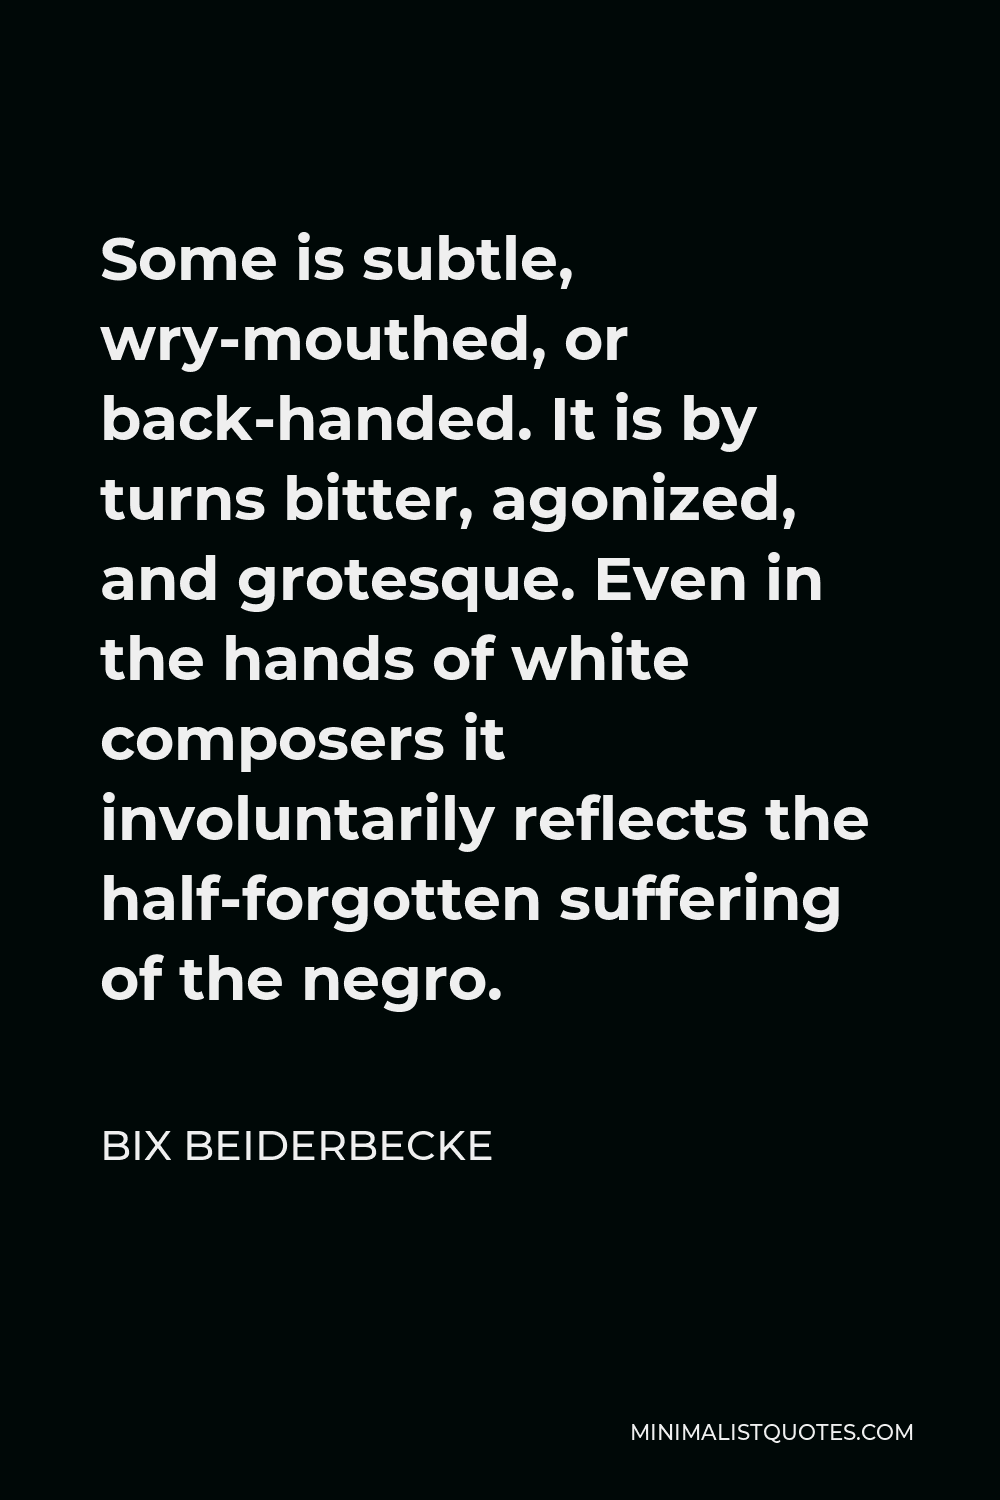 Bix Beiderbecke Quote - Some is subtle, wry-mouthed, or back-handed. It is by turns bitter, agonized, and grotesque. Even in the hands of white composers it involuntarily reflects the half-forgotten suffering of the negro.